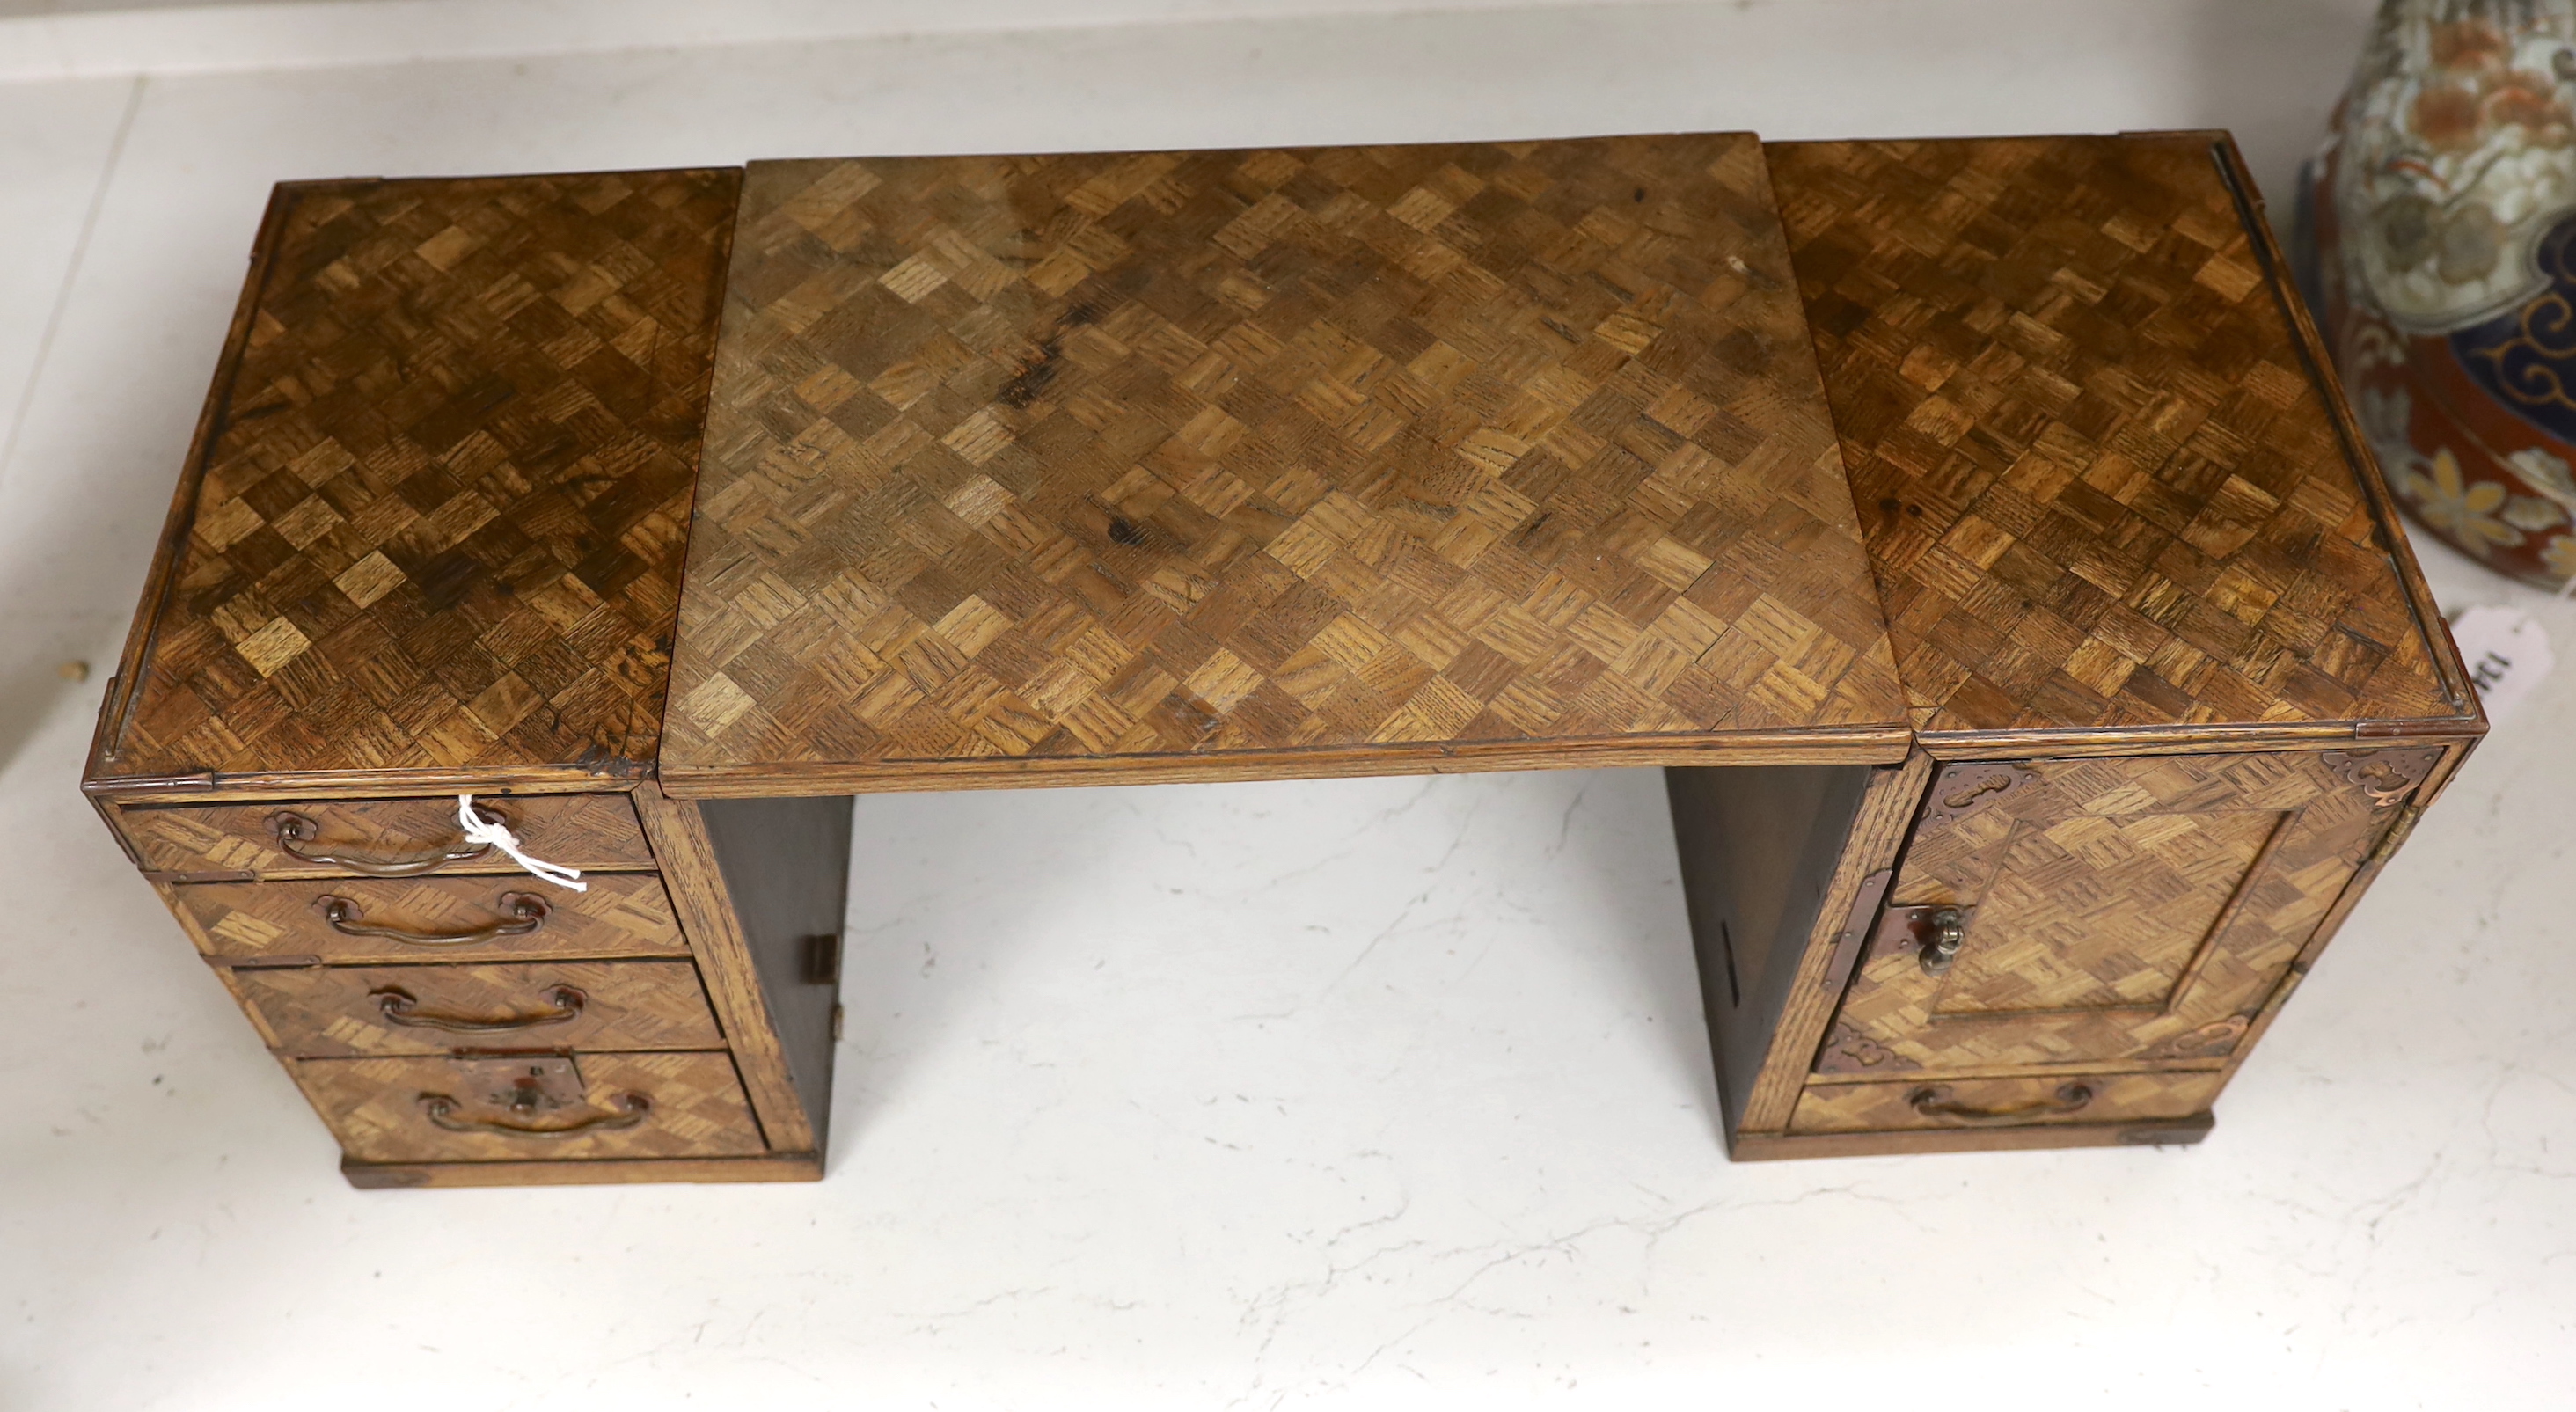 An early 20th century Japanese parquetry table cabinet or scholar's box, 24.5cm high, 63cm wide when extended